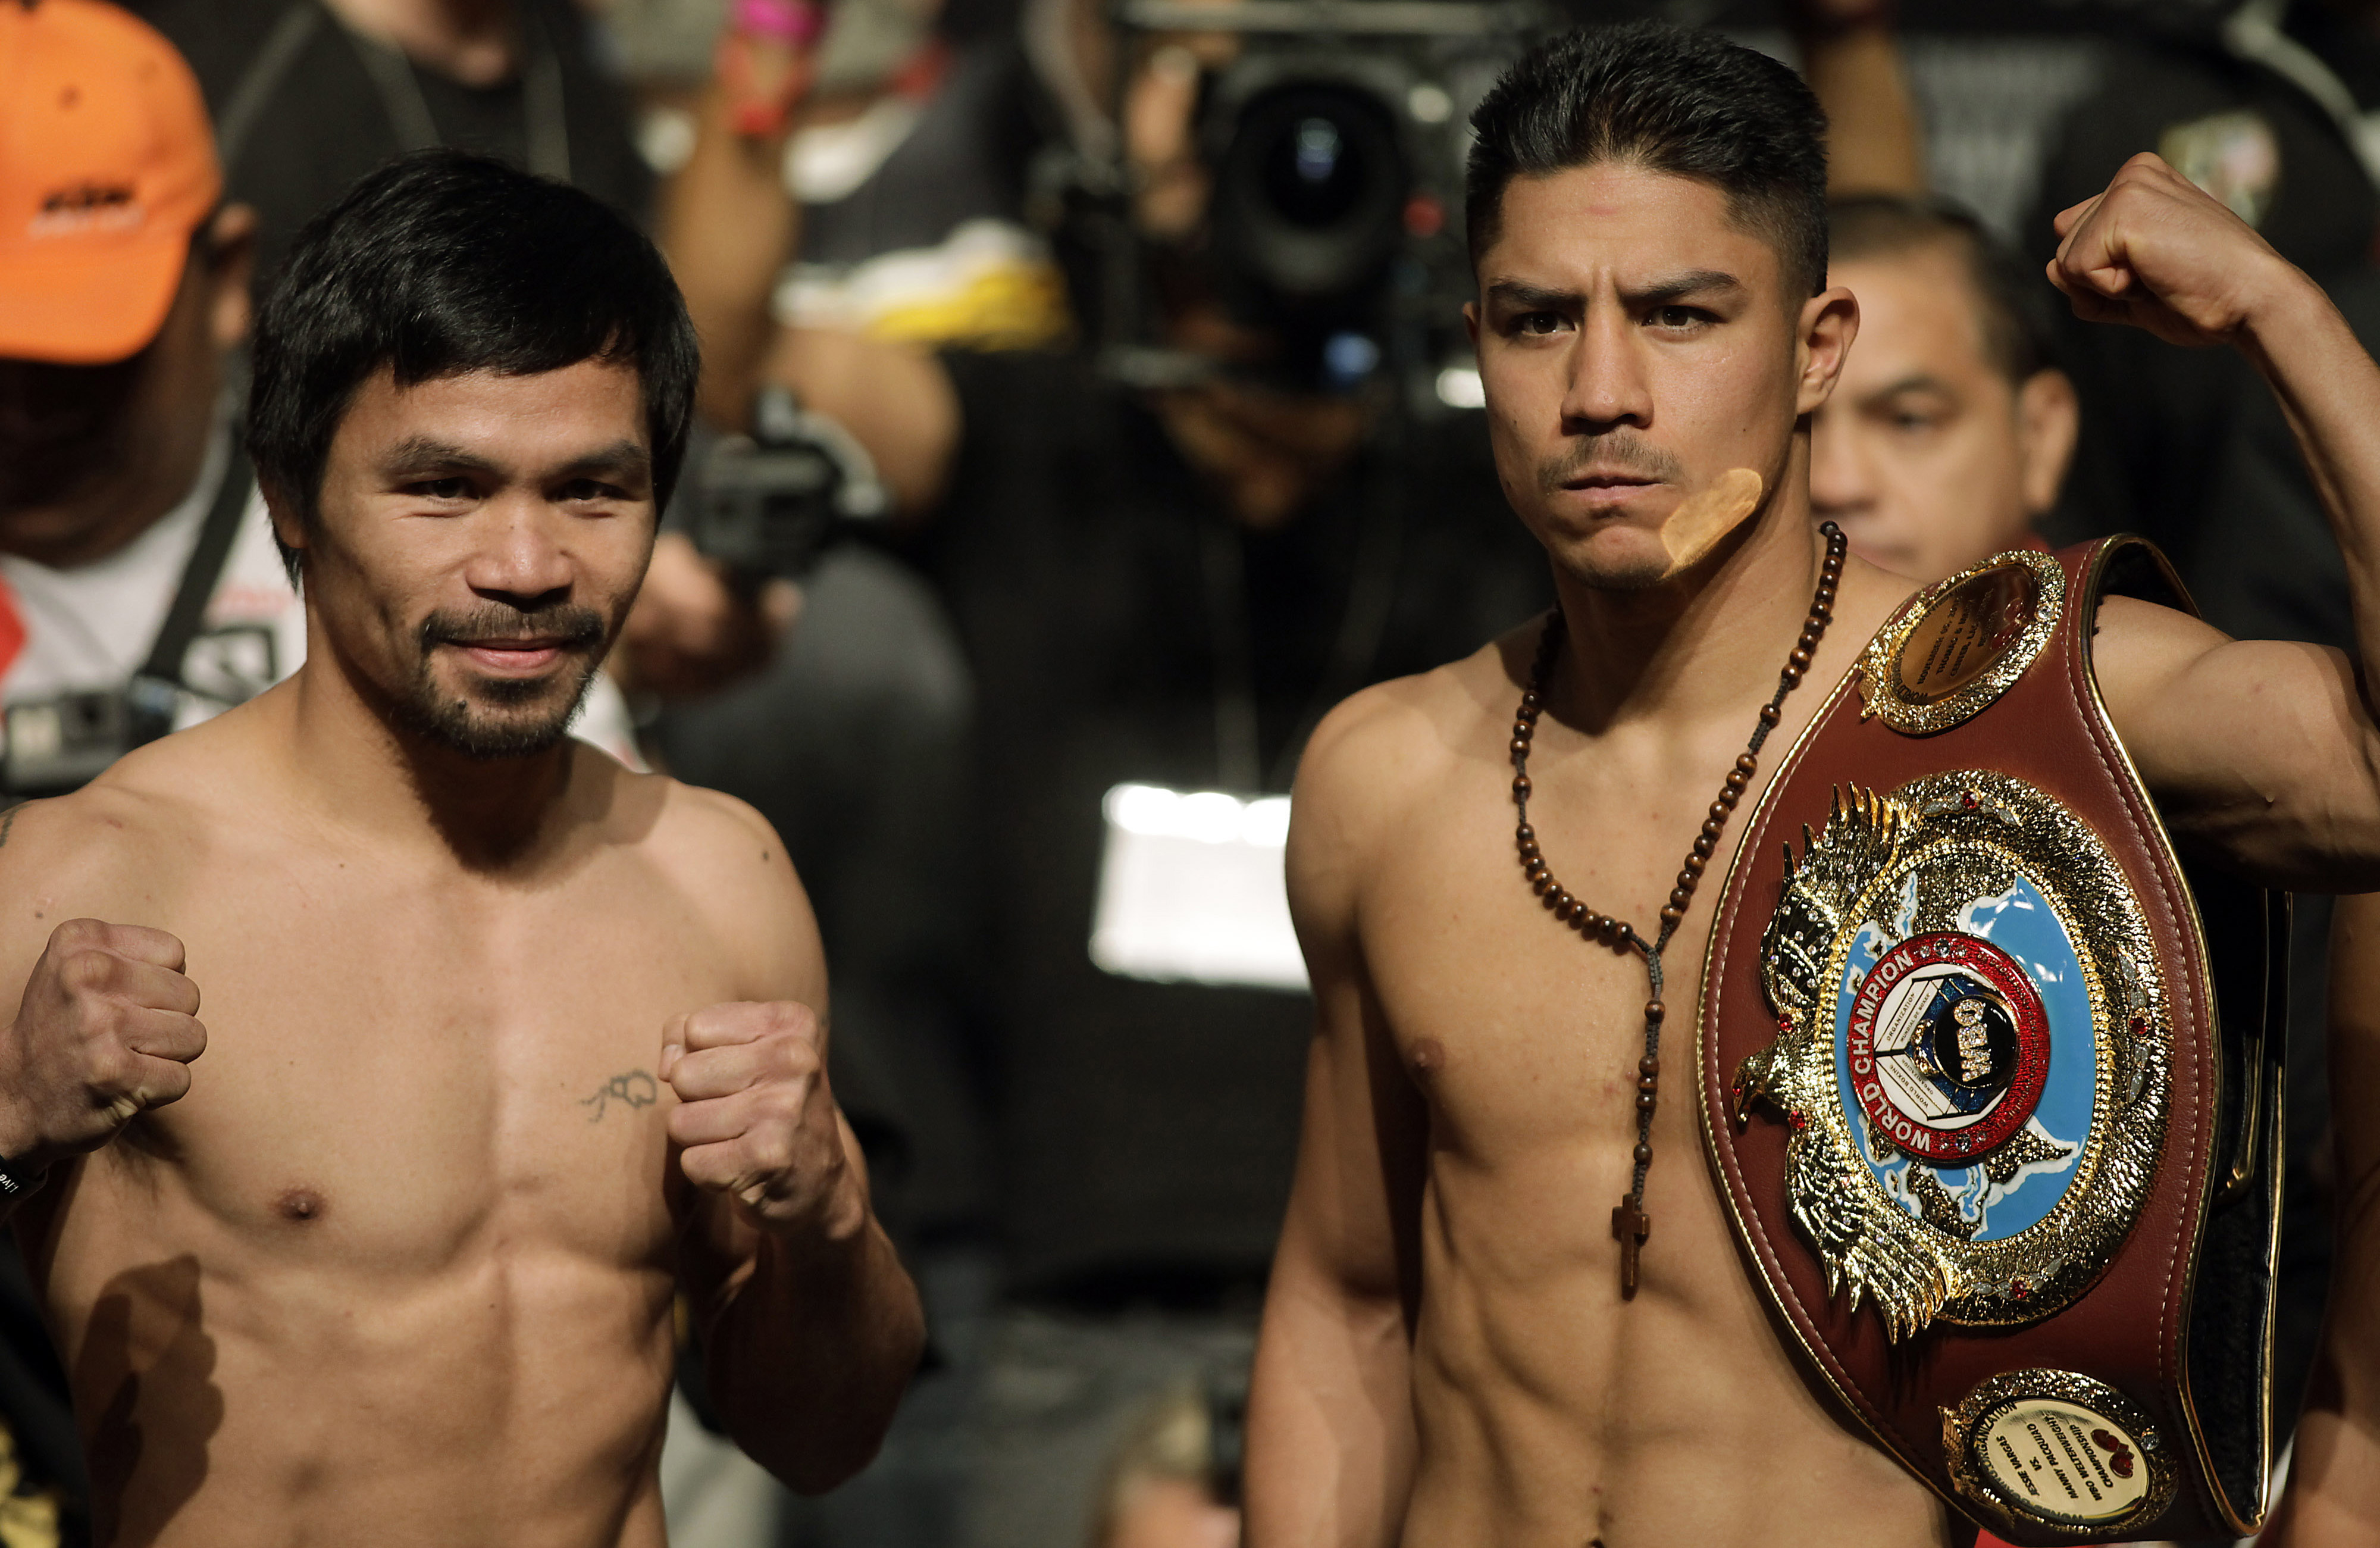 Boxers Manny Pacquiao, Philippines, and Jessie Vargas, USA, pose together during their official weigh-in at the Wynn Las Vegas hotel in Las Vegas, Nevada on November 4, 2016.   Pacquiao will challenge Vargas for the WBO Welterweight Title Saturday, November 5, 2016 at the Thomas & Mack Center.  / AFP PHOTO / John GURZINSKI